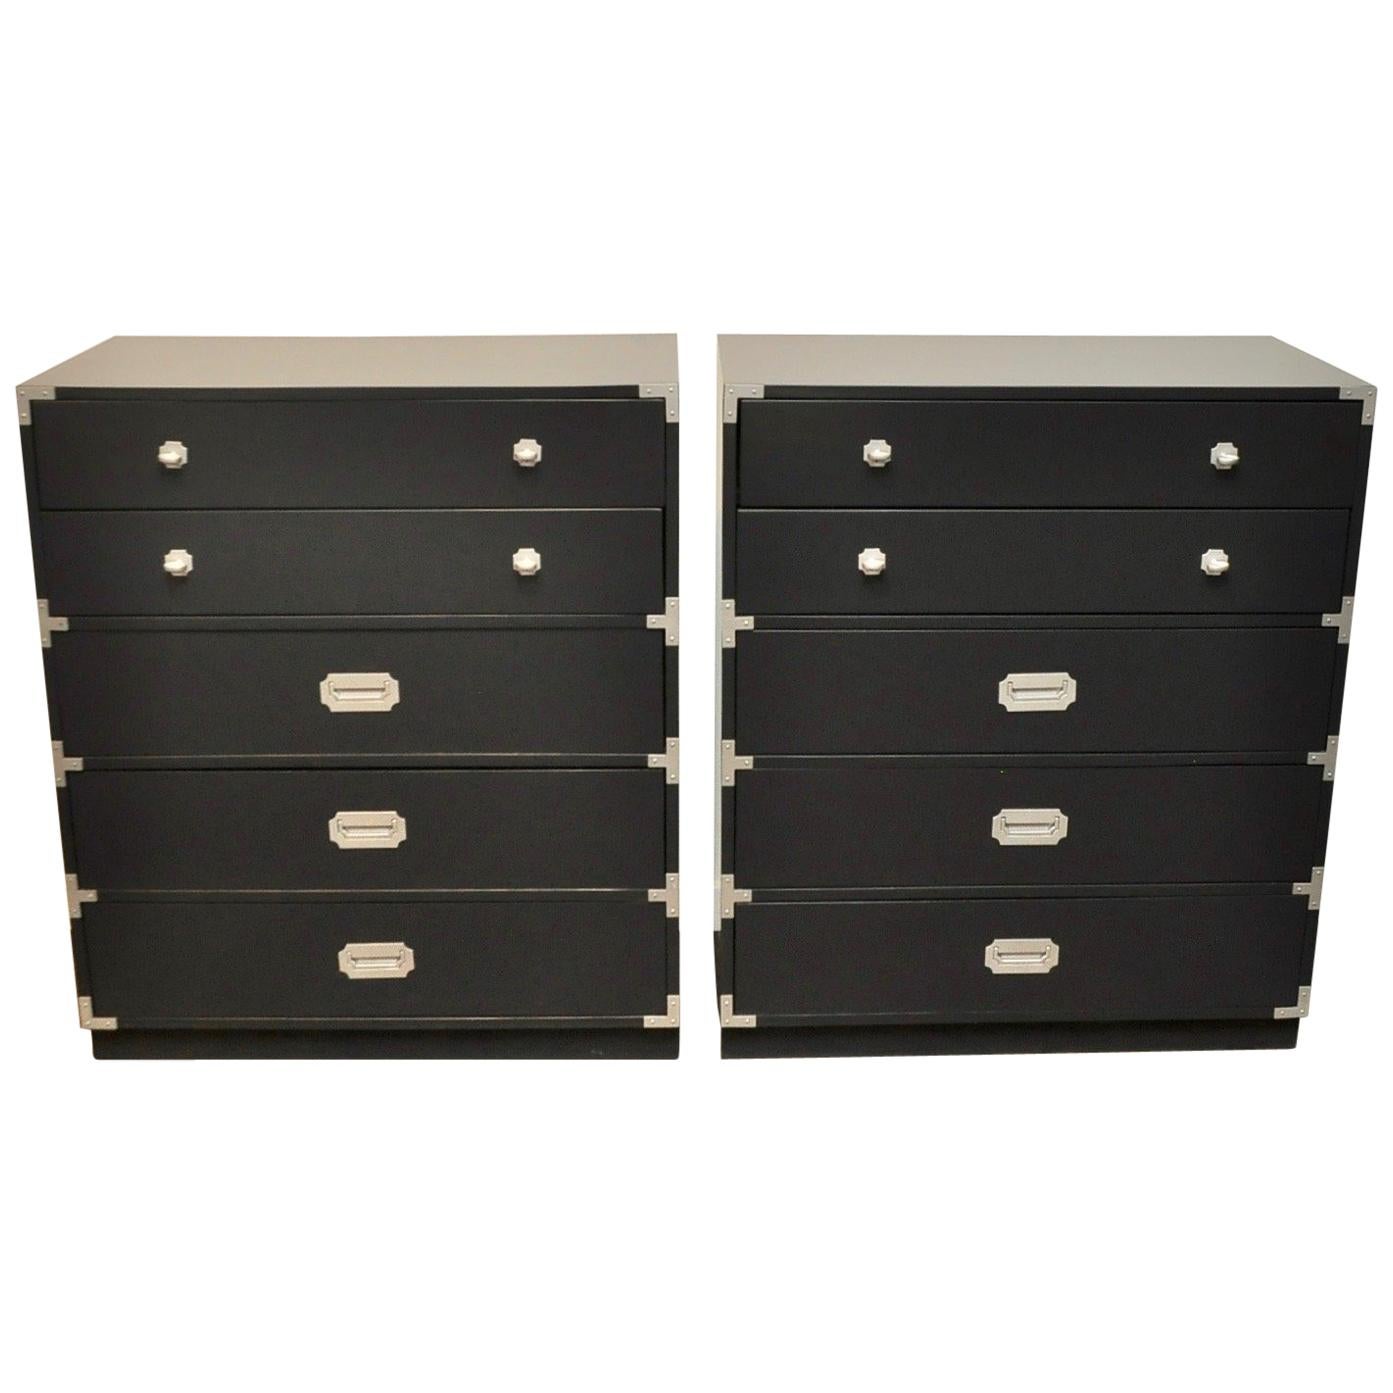 Pair of Lacquered Five-Drawer Campaign Chests by Bernhardt